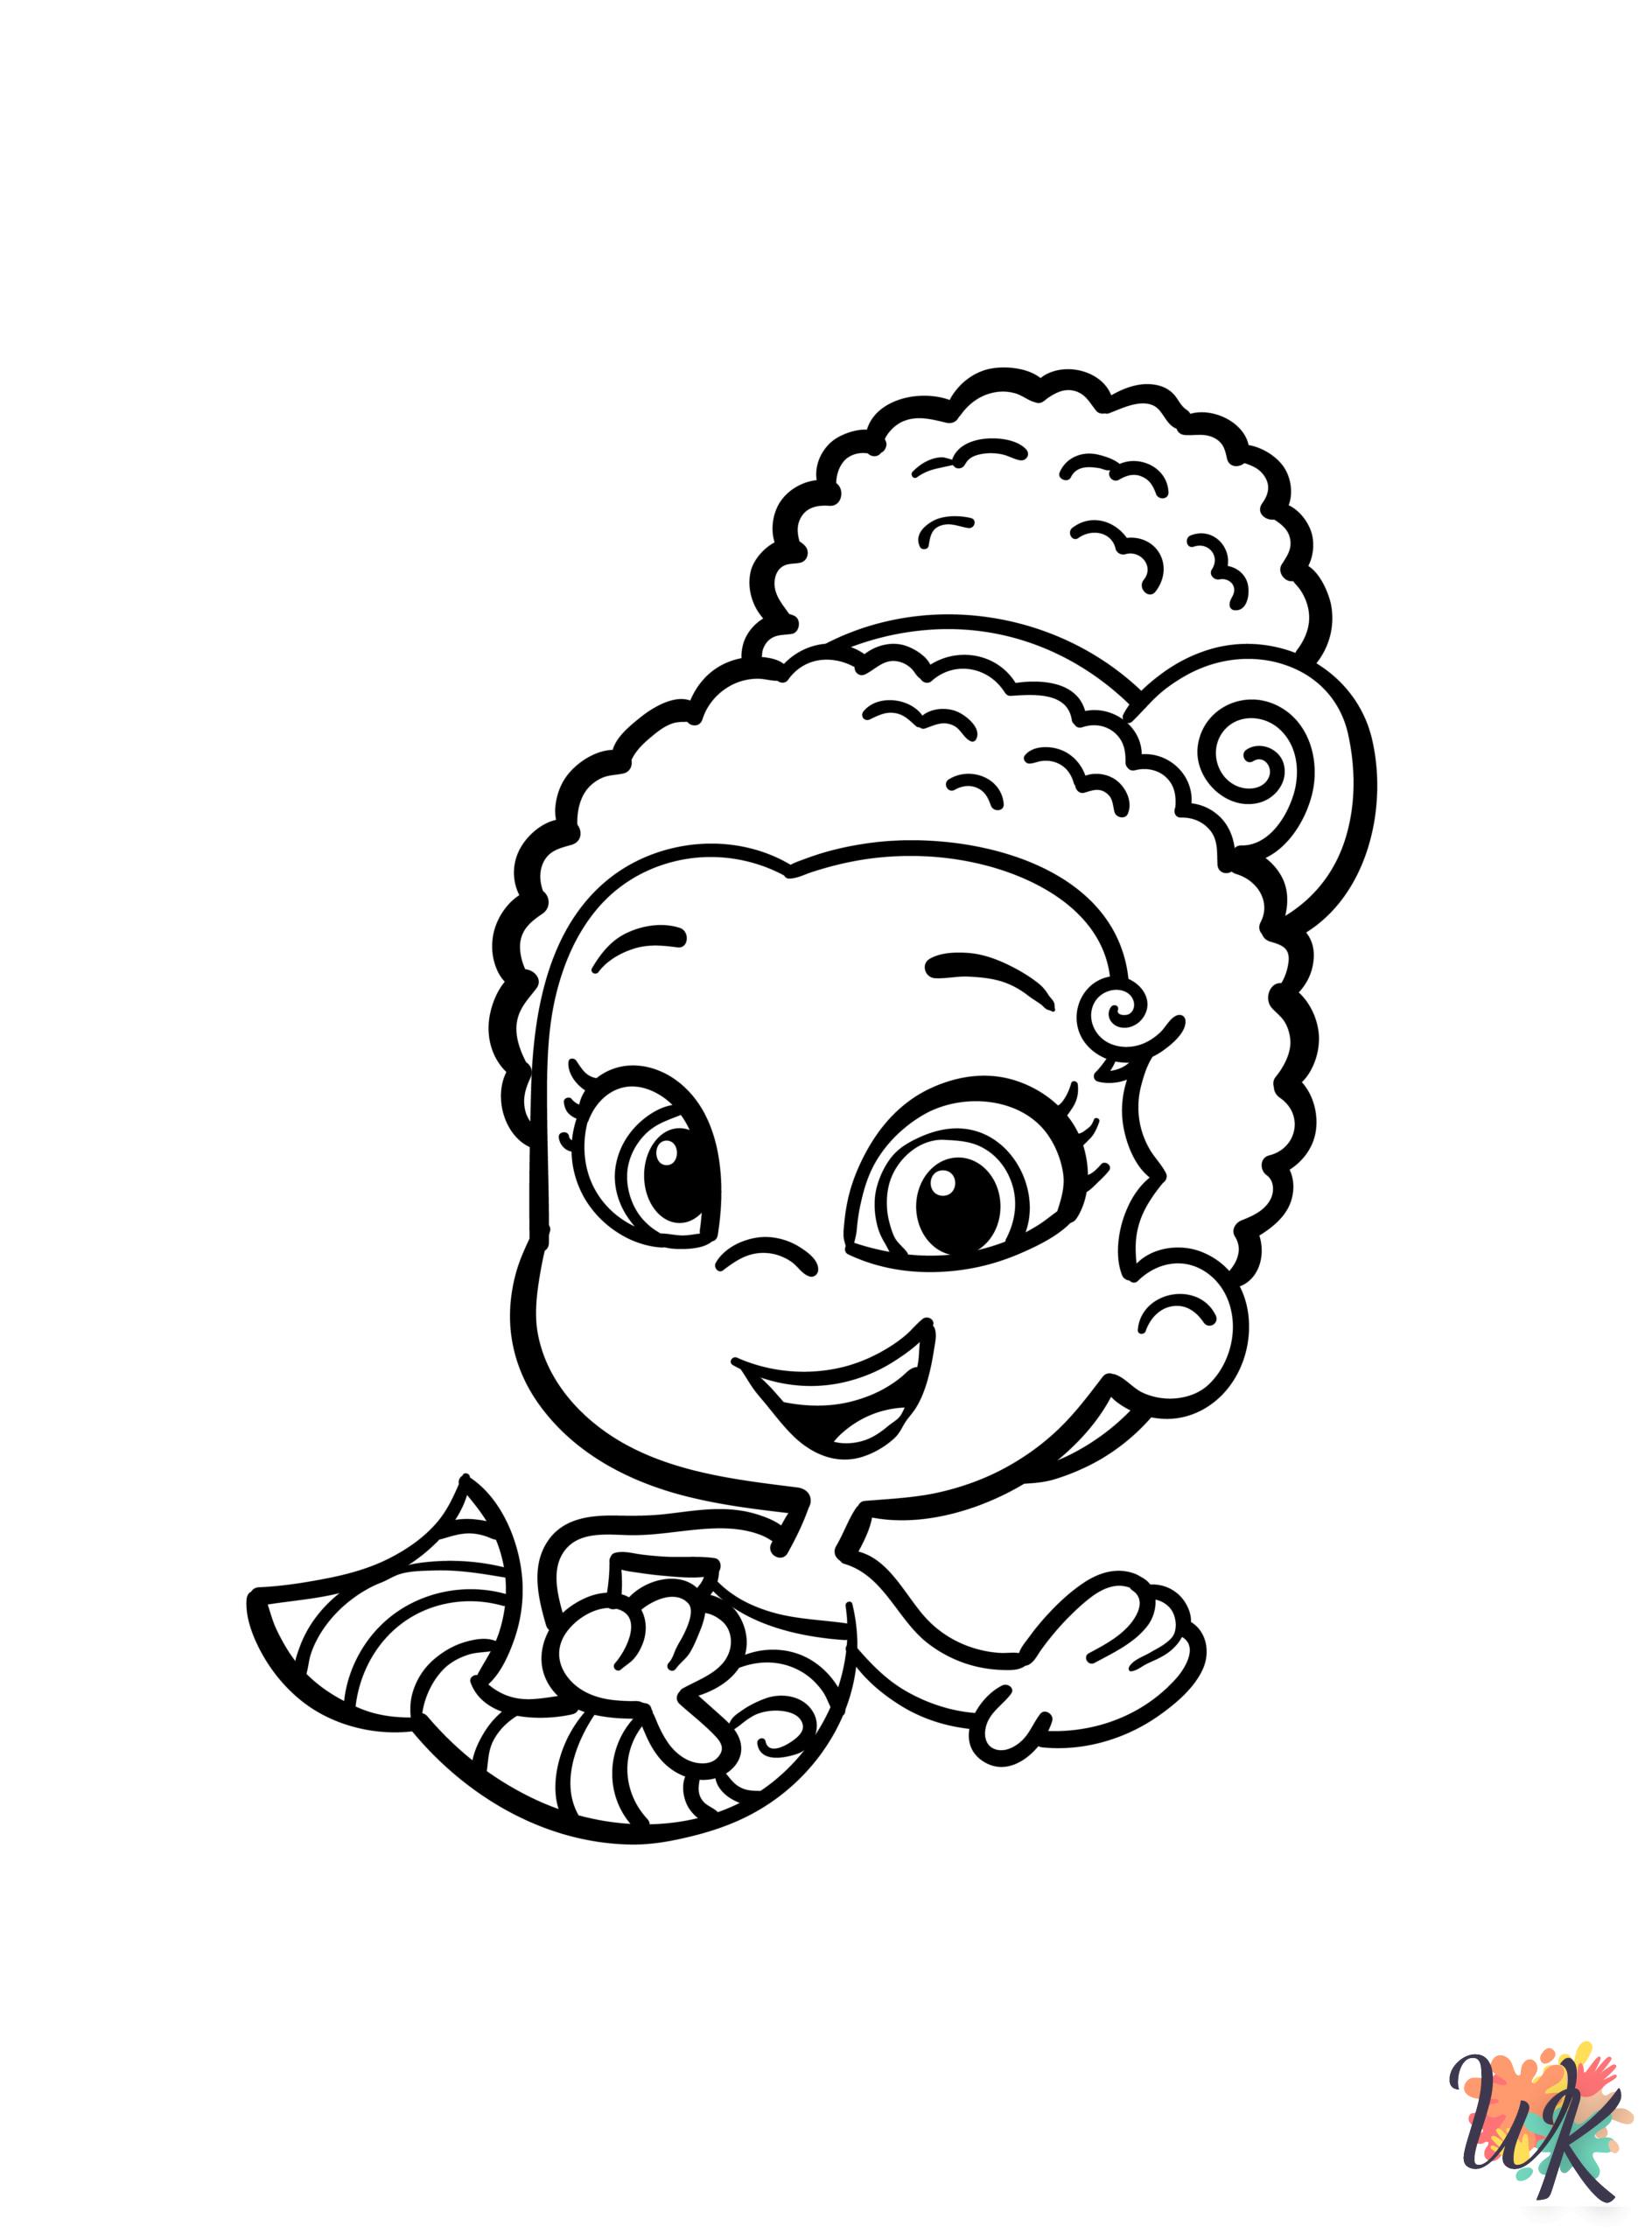 merry Bubble Guppies coloring pages